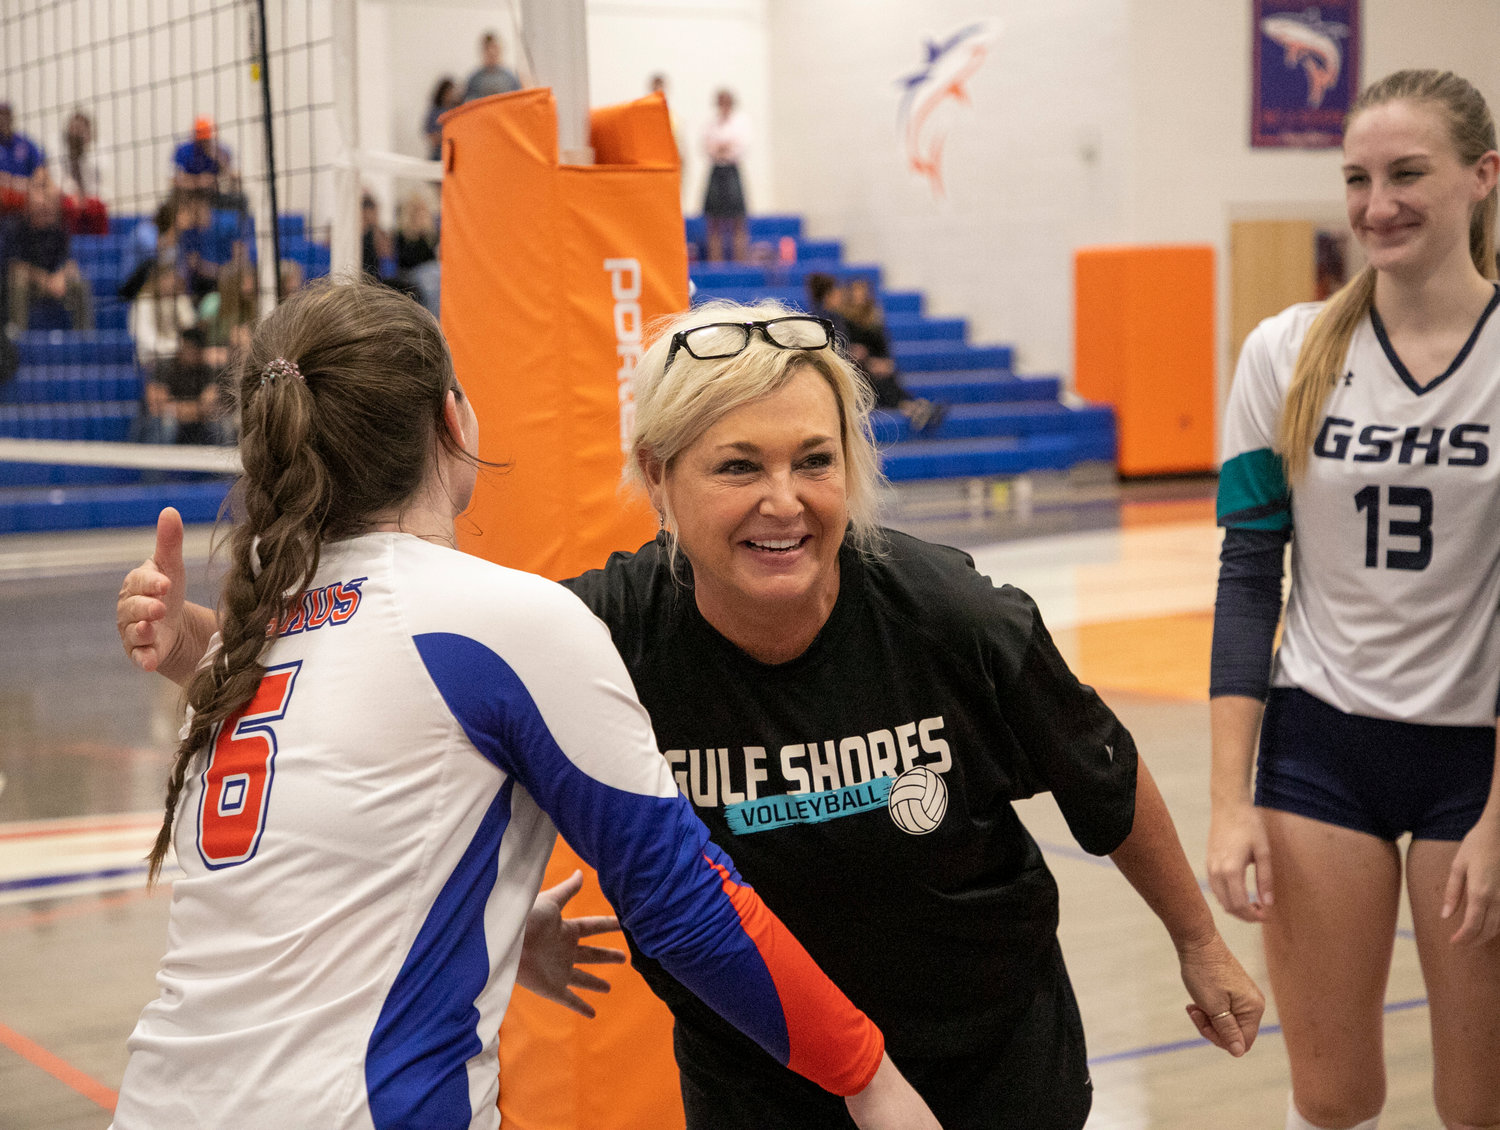 Former Gulf Shores head volleyball coach Karen Atkins embraces Orange Beach senior Leyni Young during the non-area contest between the Dolphins and Makos Aug. 25, 2022, at Orange Beach High School. Atkins was named the newest Mako head volleyball coach Monday, Jan. 16, and will have Laura Der Hopkins as her assistant coach.